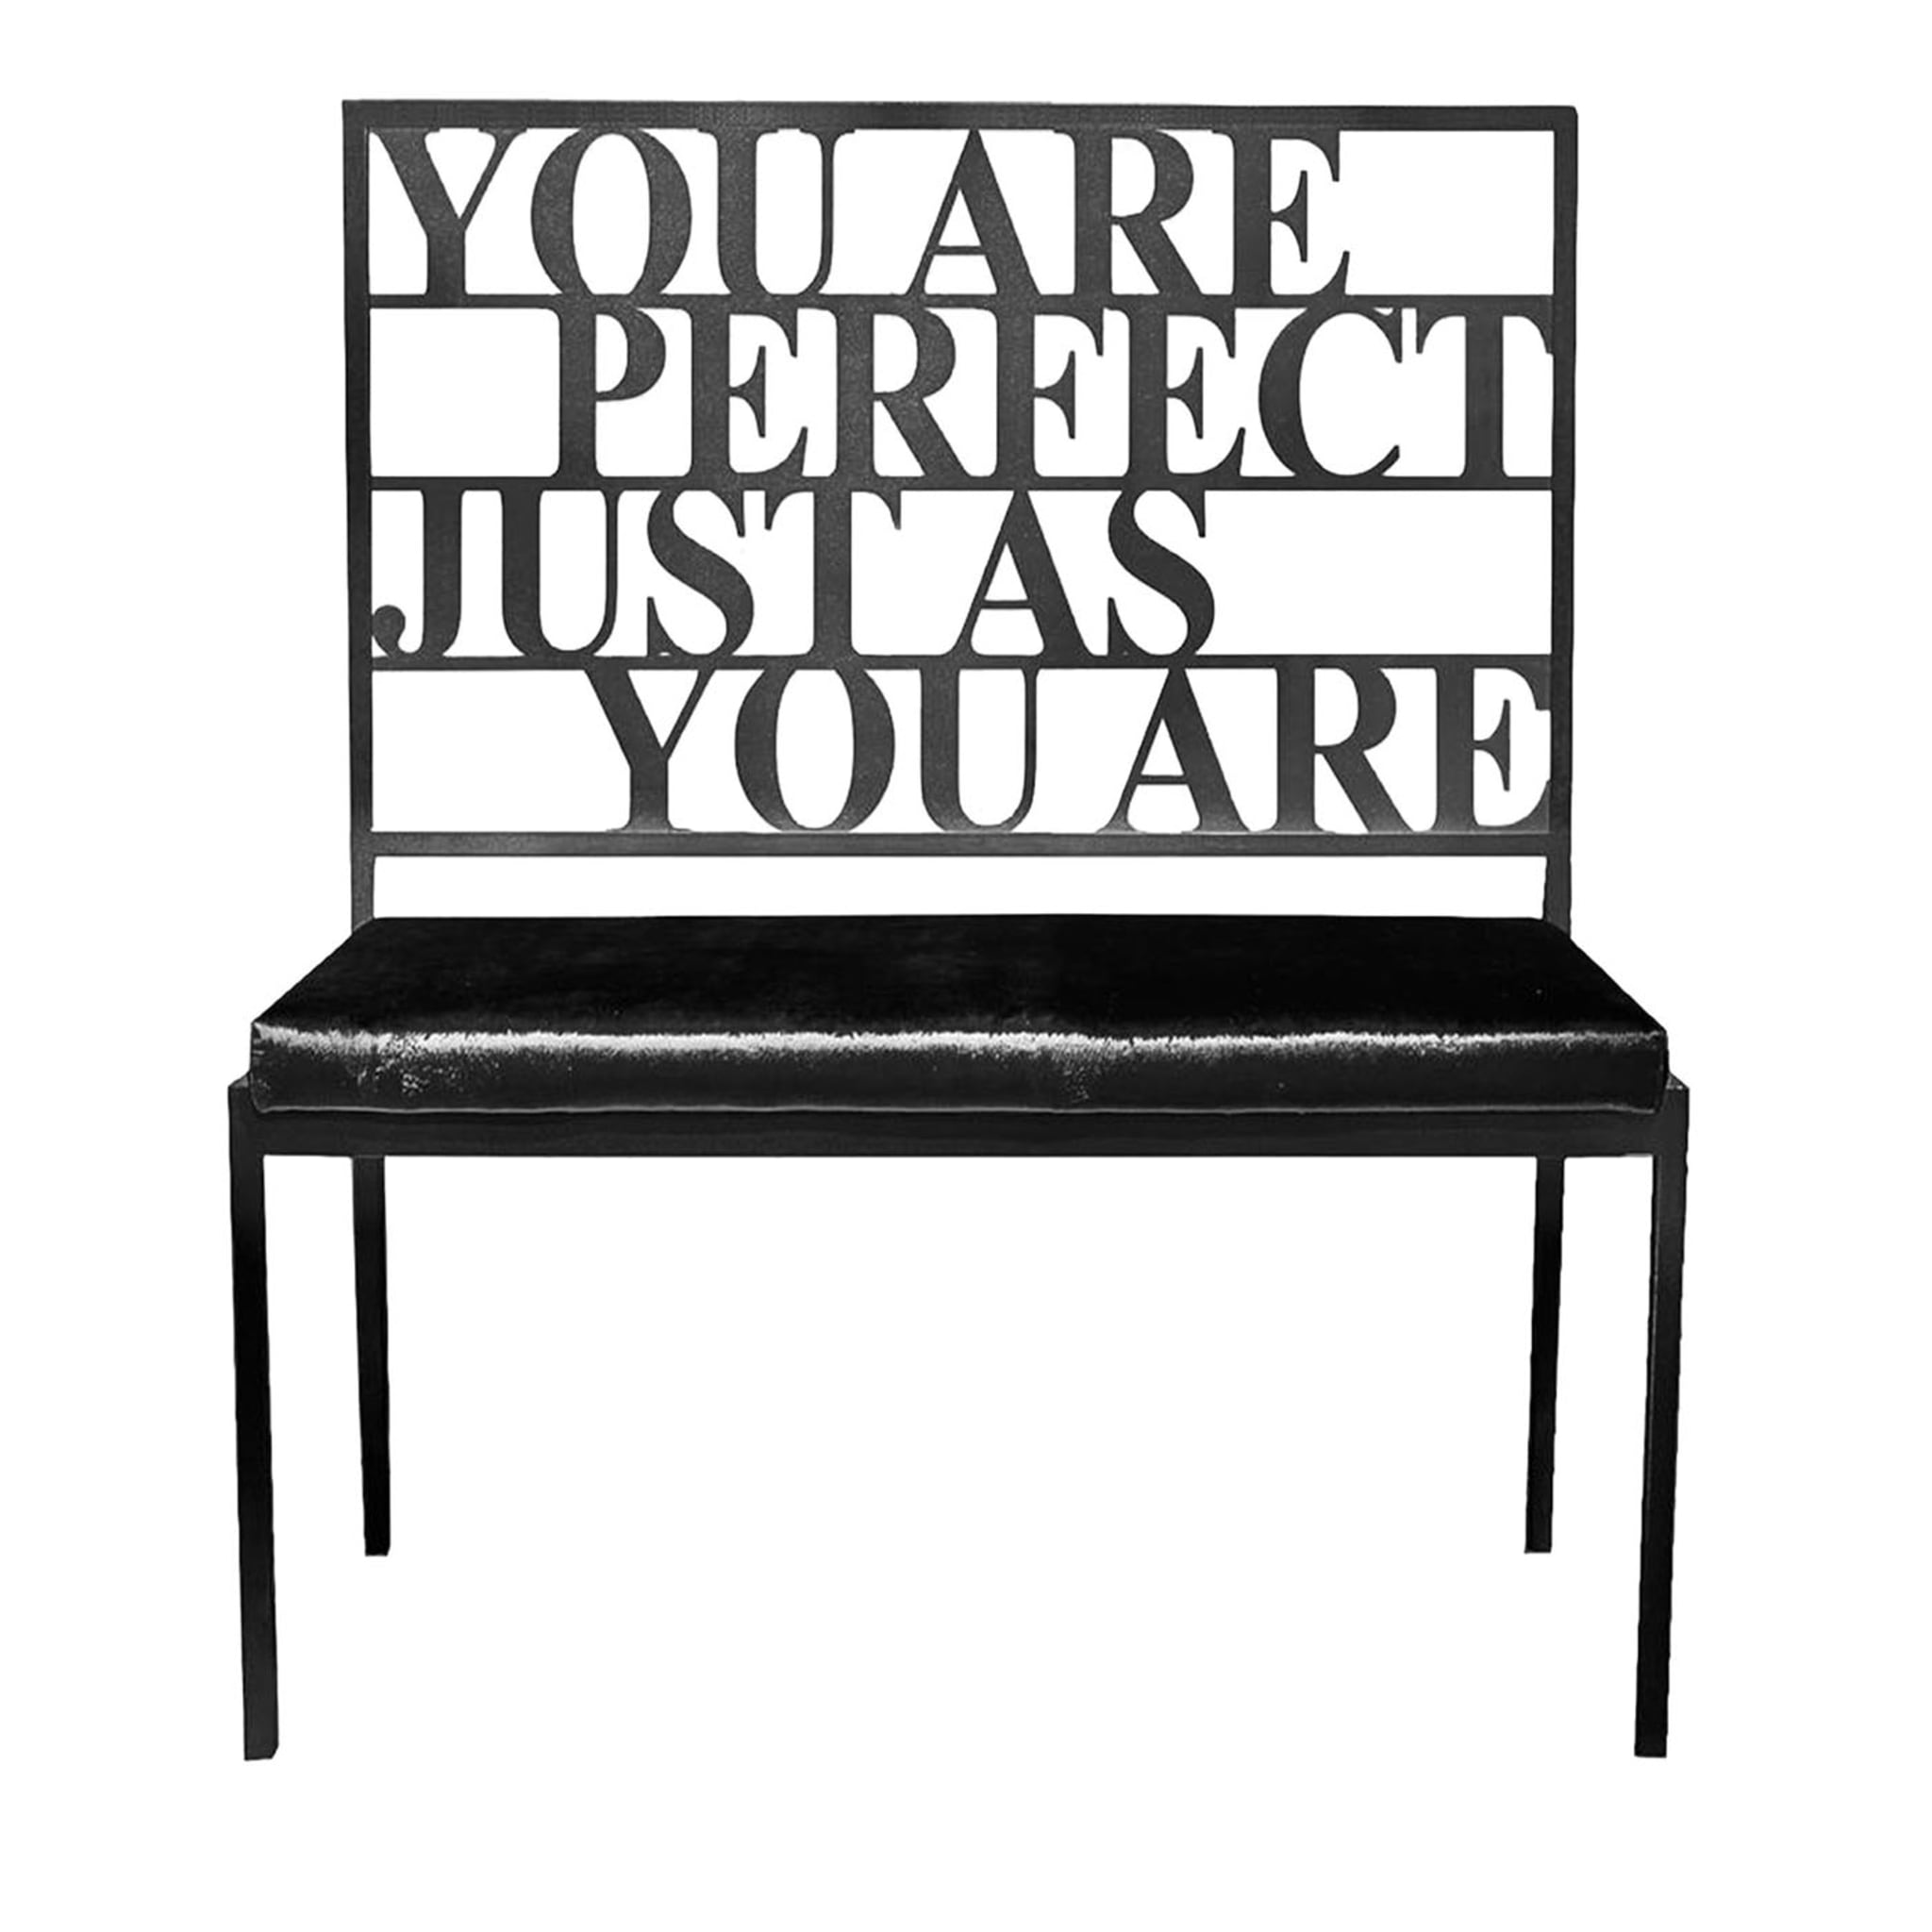 Imperfect Love You are perfect... Black Bench - Main view